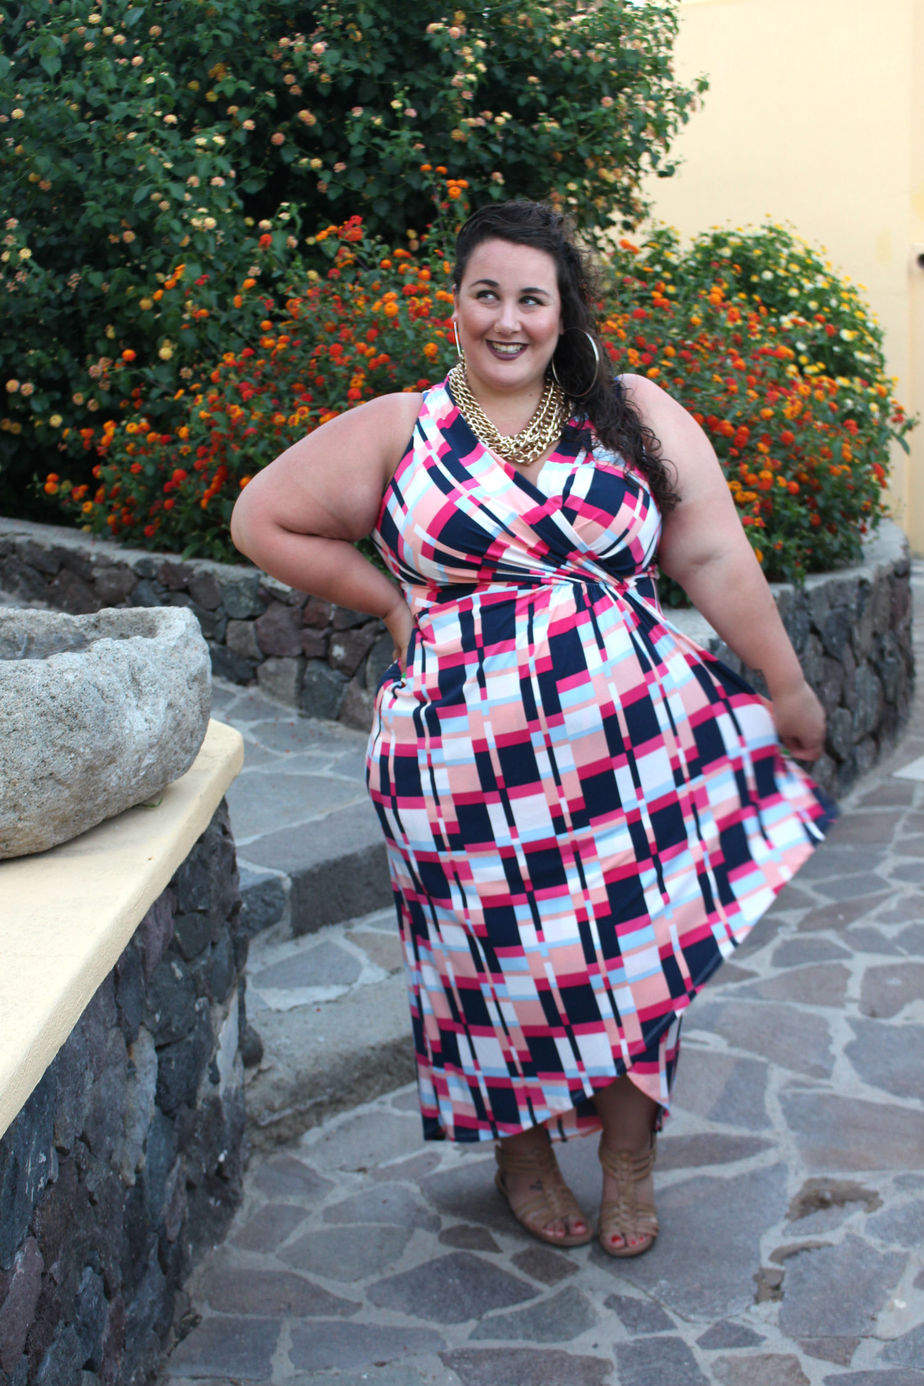 Traveling Abroad with Gwynnie Bee's Plus Size Clothing Rental Service